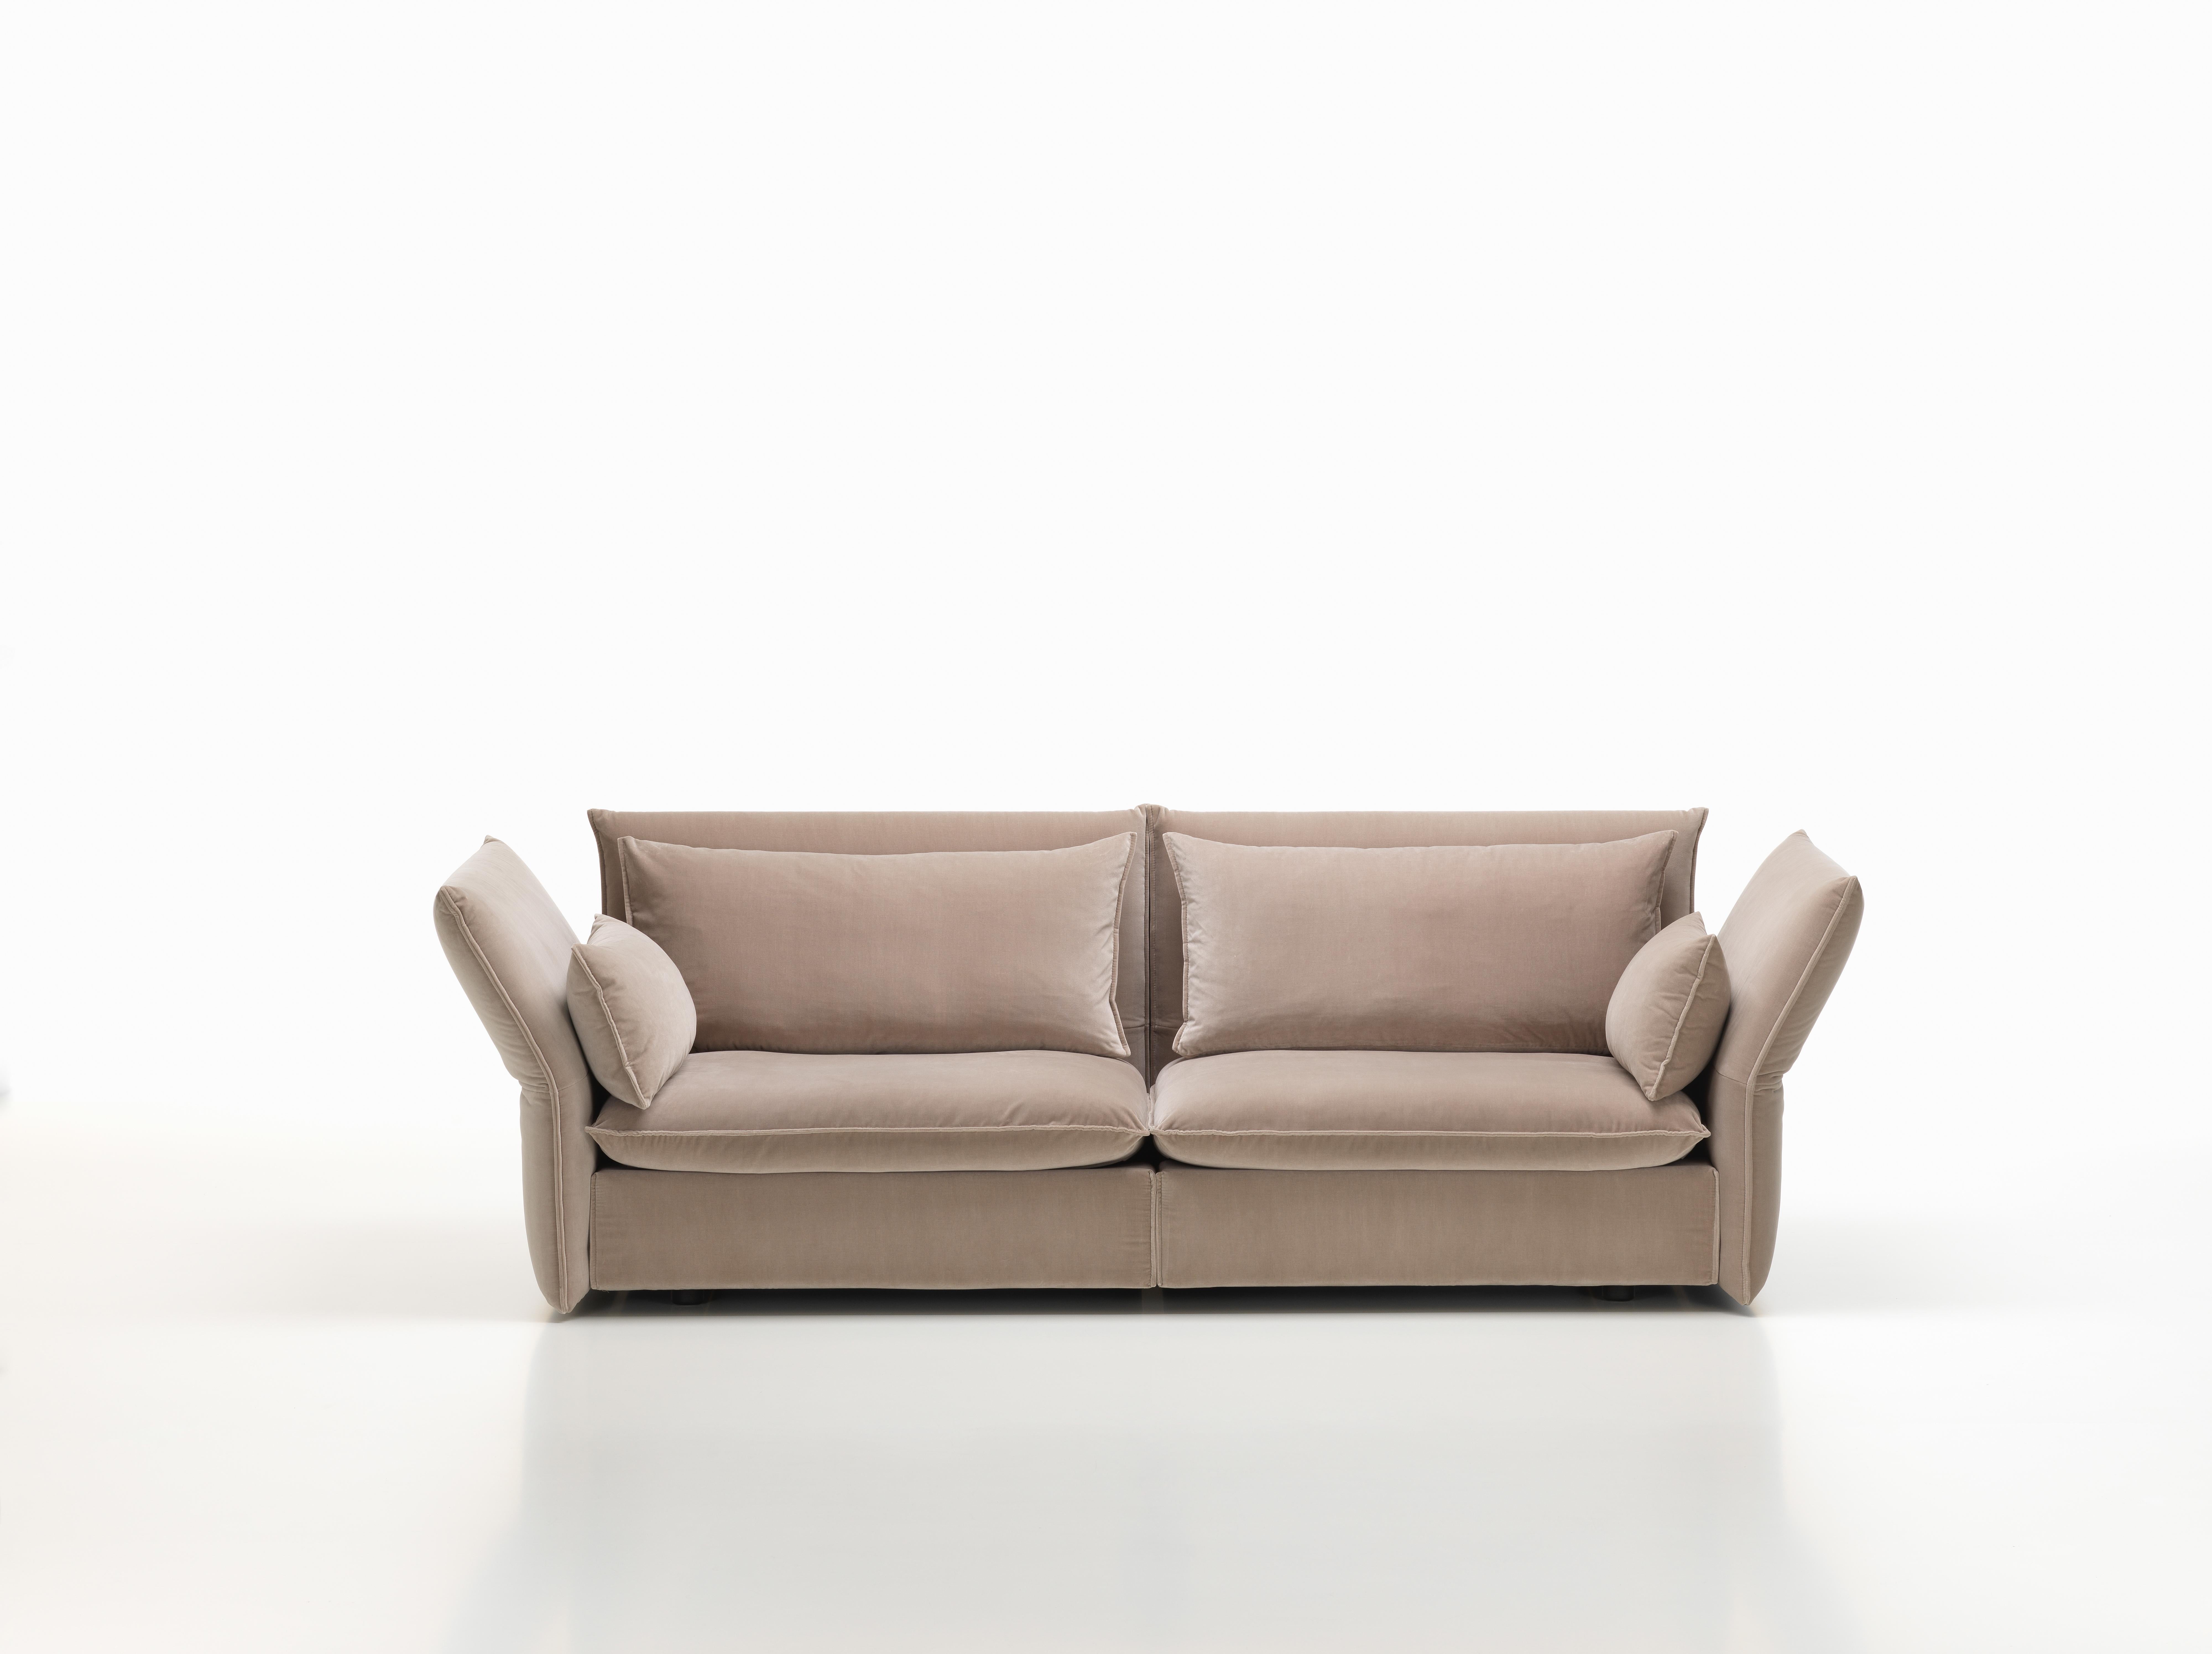 The Mariposa sofa radiates spacious materials cosines and yet has an understated feel due to its well-balanced proportions. Its pleasantly soft upholstery provides extraordinary comfort: the user sinks into its sea of cushions with not a hard